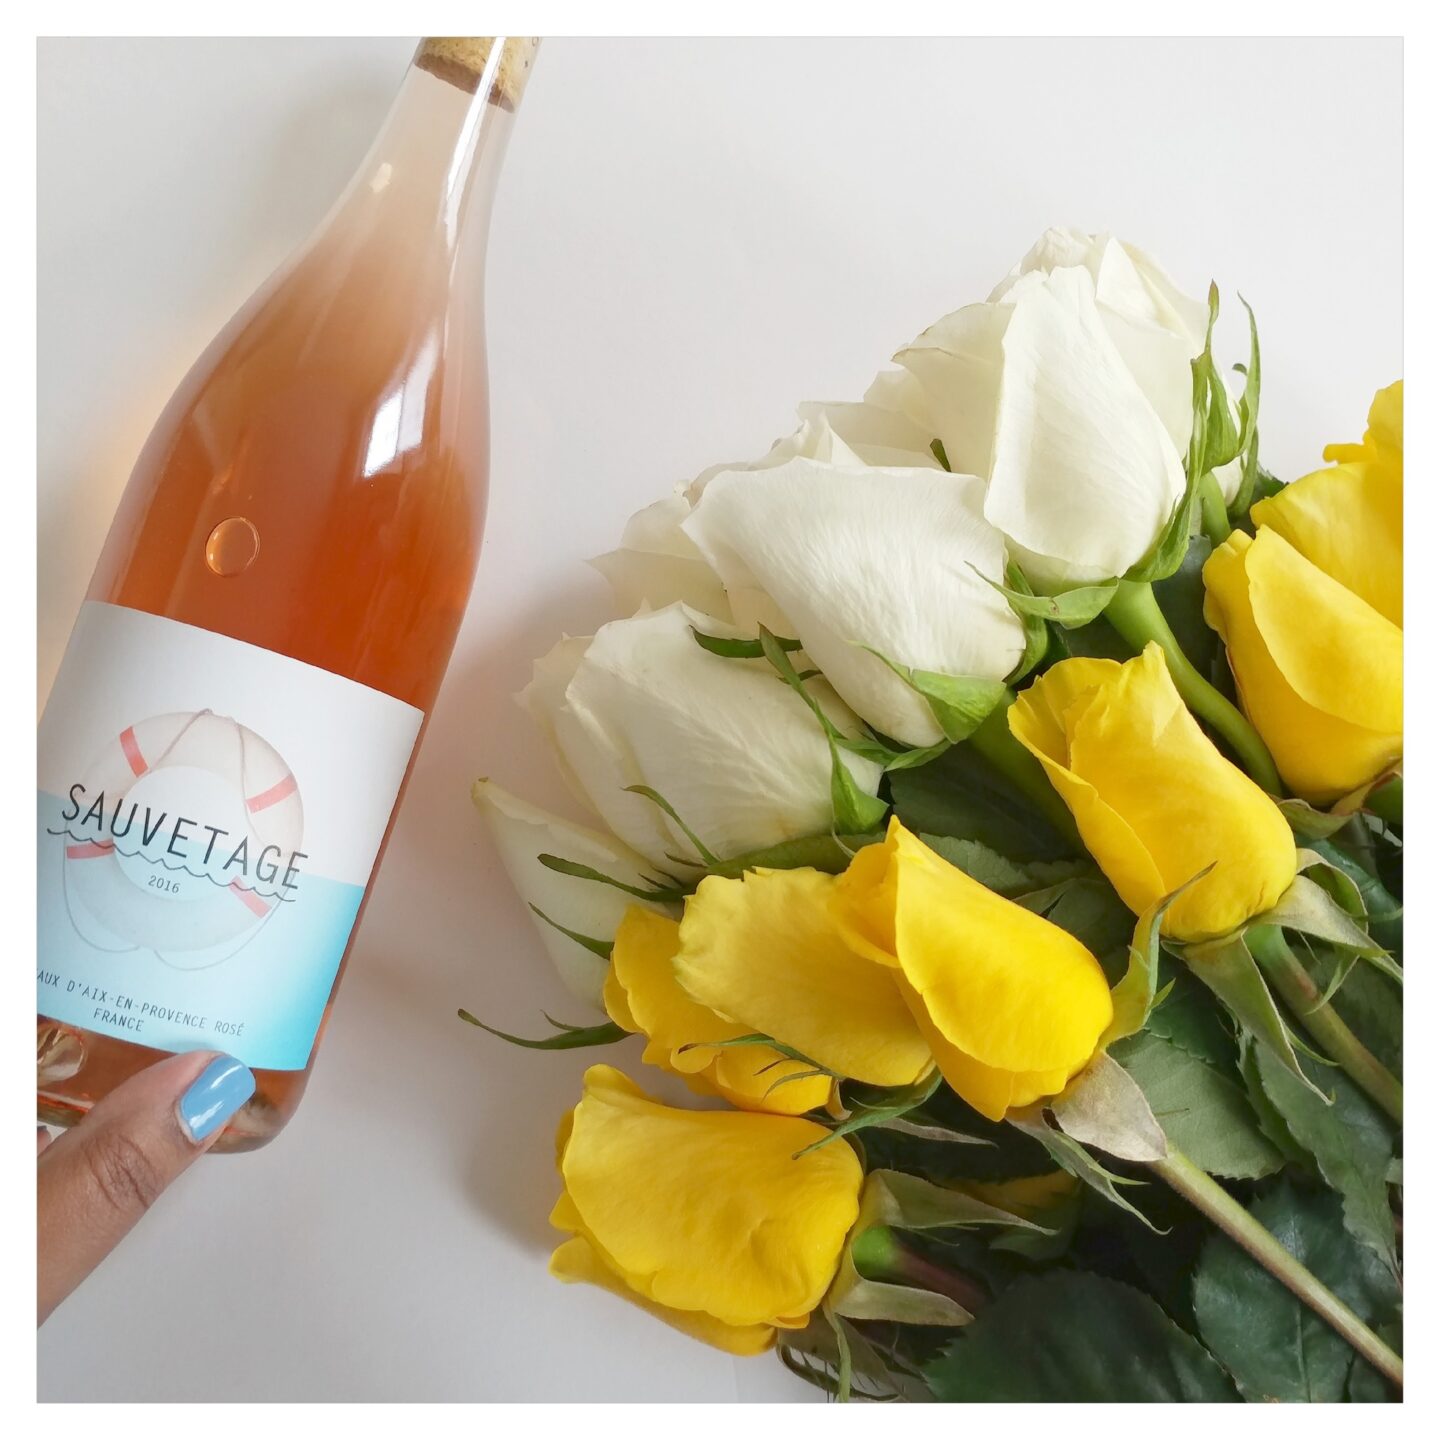 rose is for summertime and winc delivers